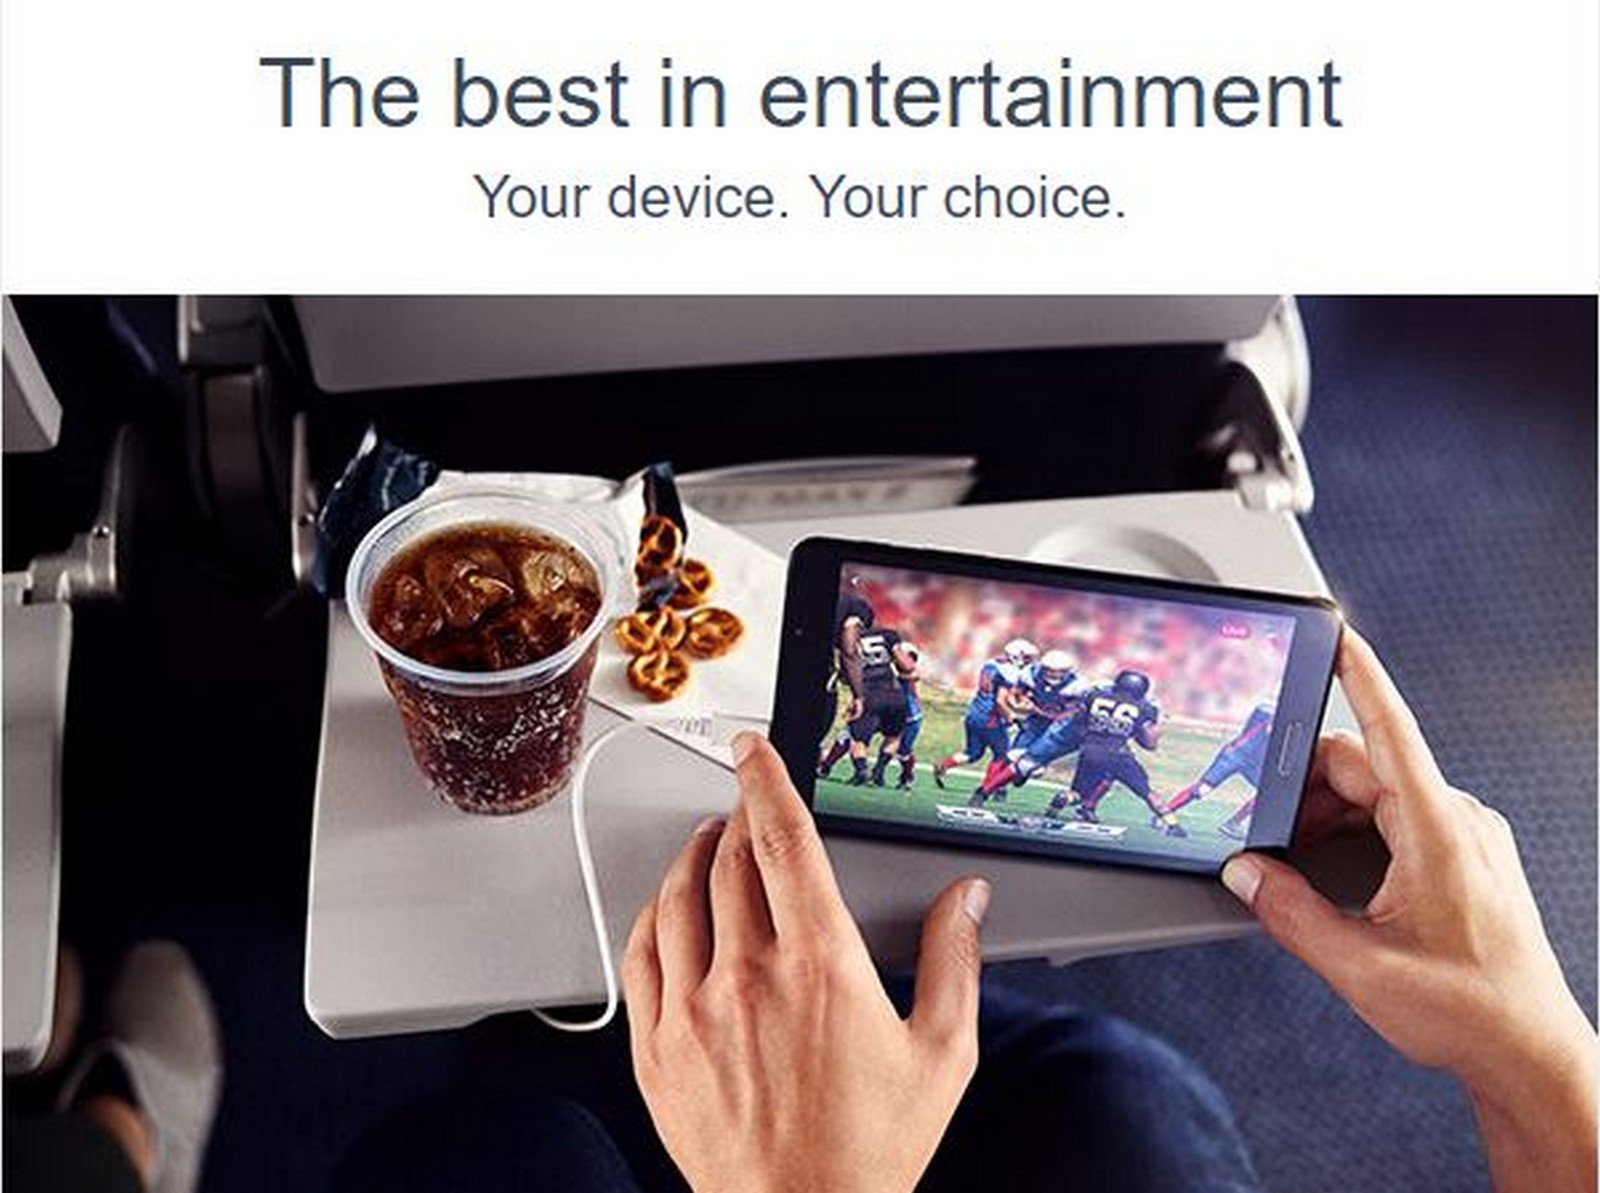 American Airlines Now Offers Free Entertainment